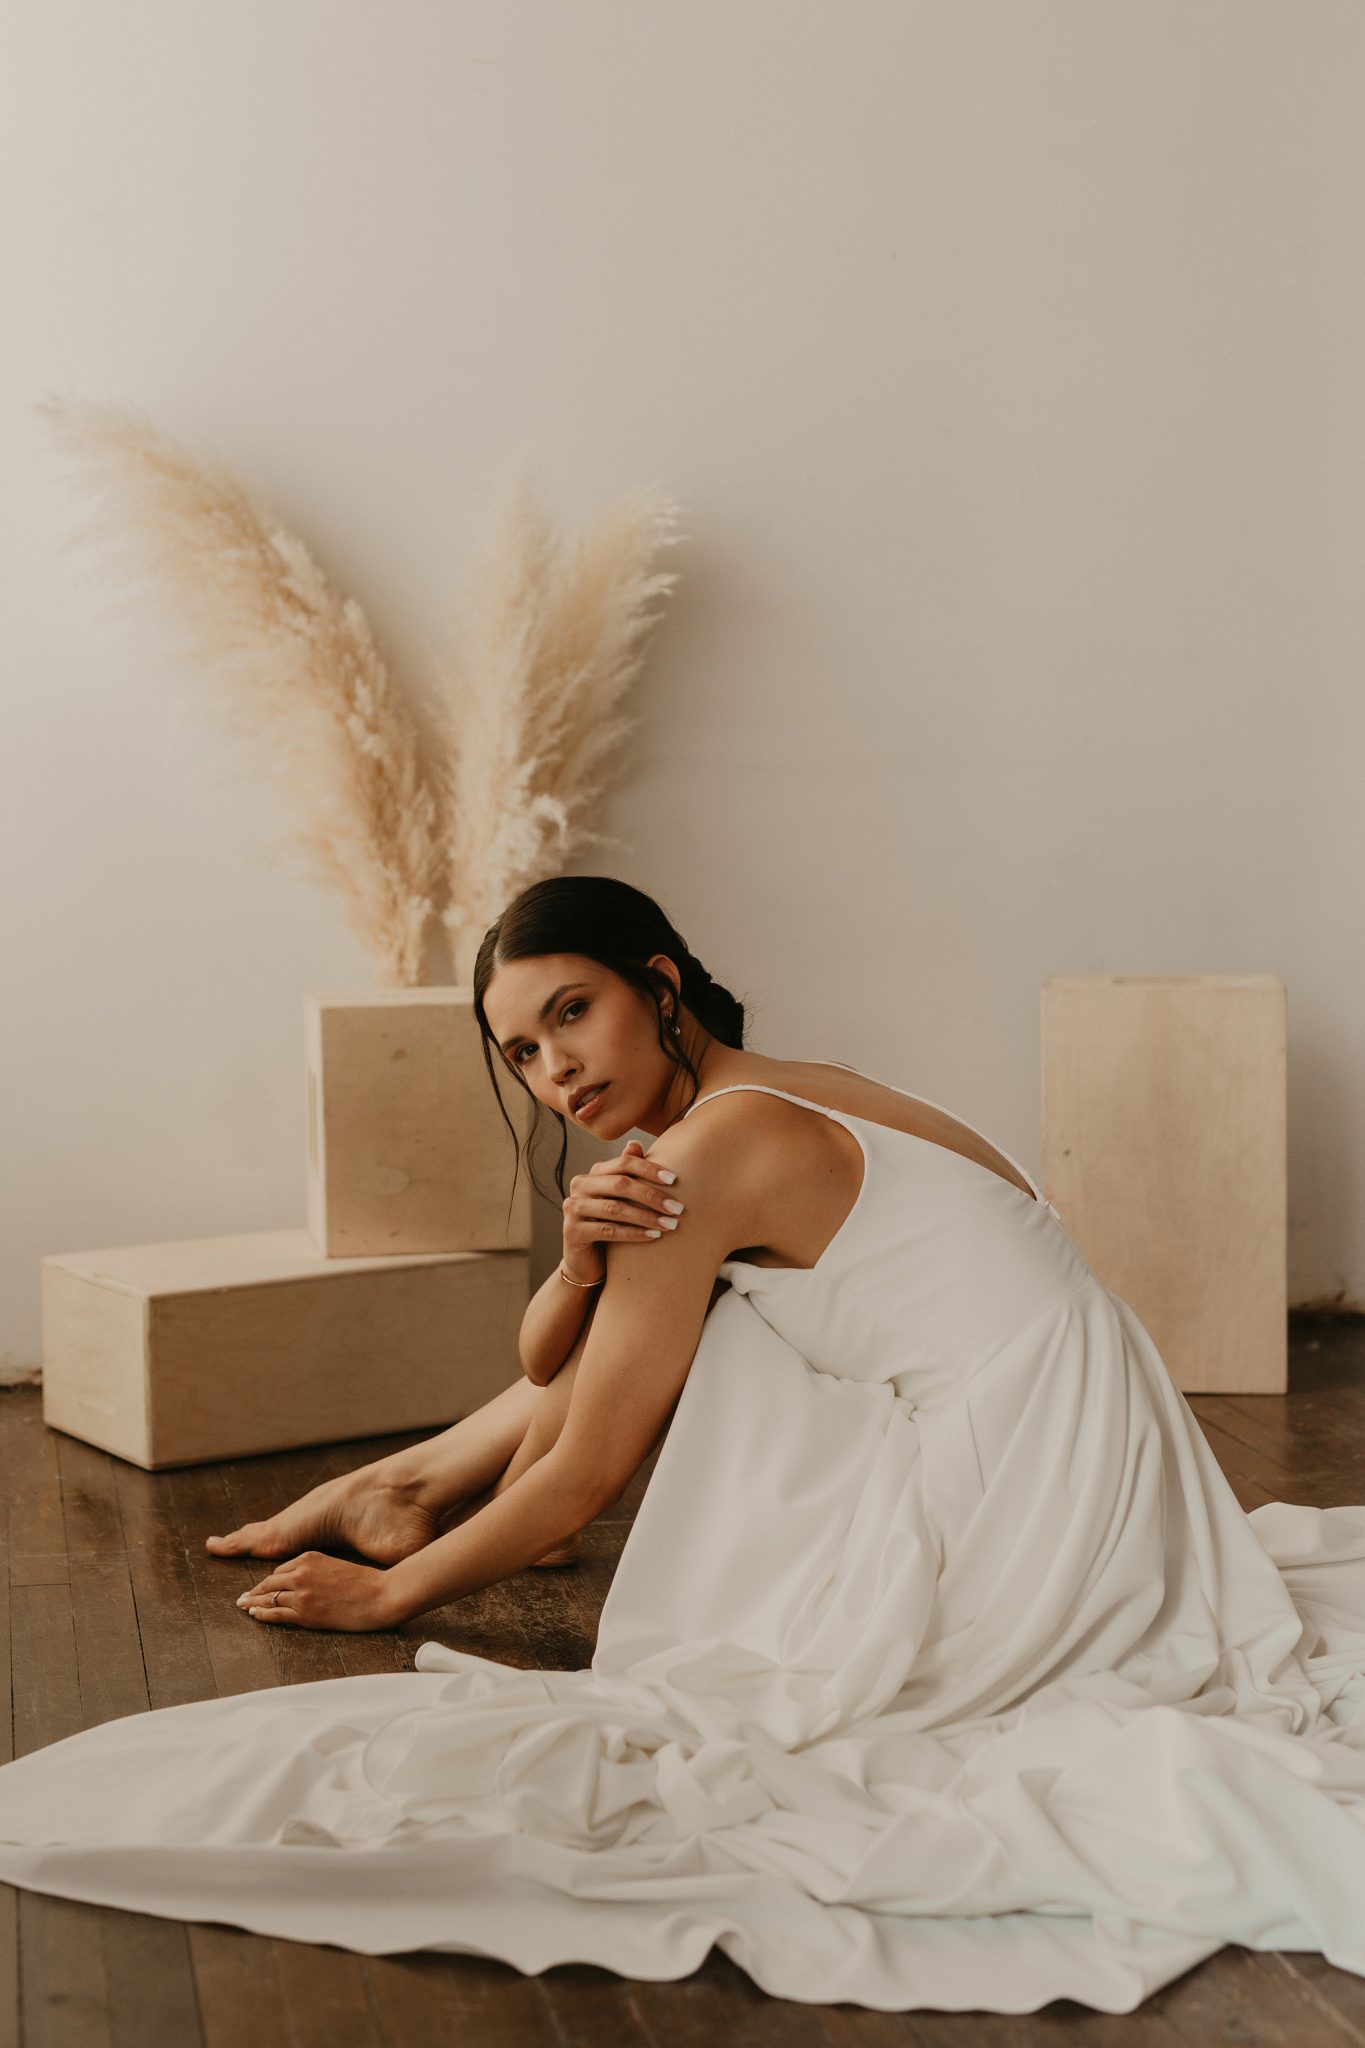 Bridal Minimalism Feature on Bronte Bride: Delica Bridal Shares All About New Bridal Trends & Dress Shopping During Covid, wedding dress shopping, boho bridal